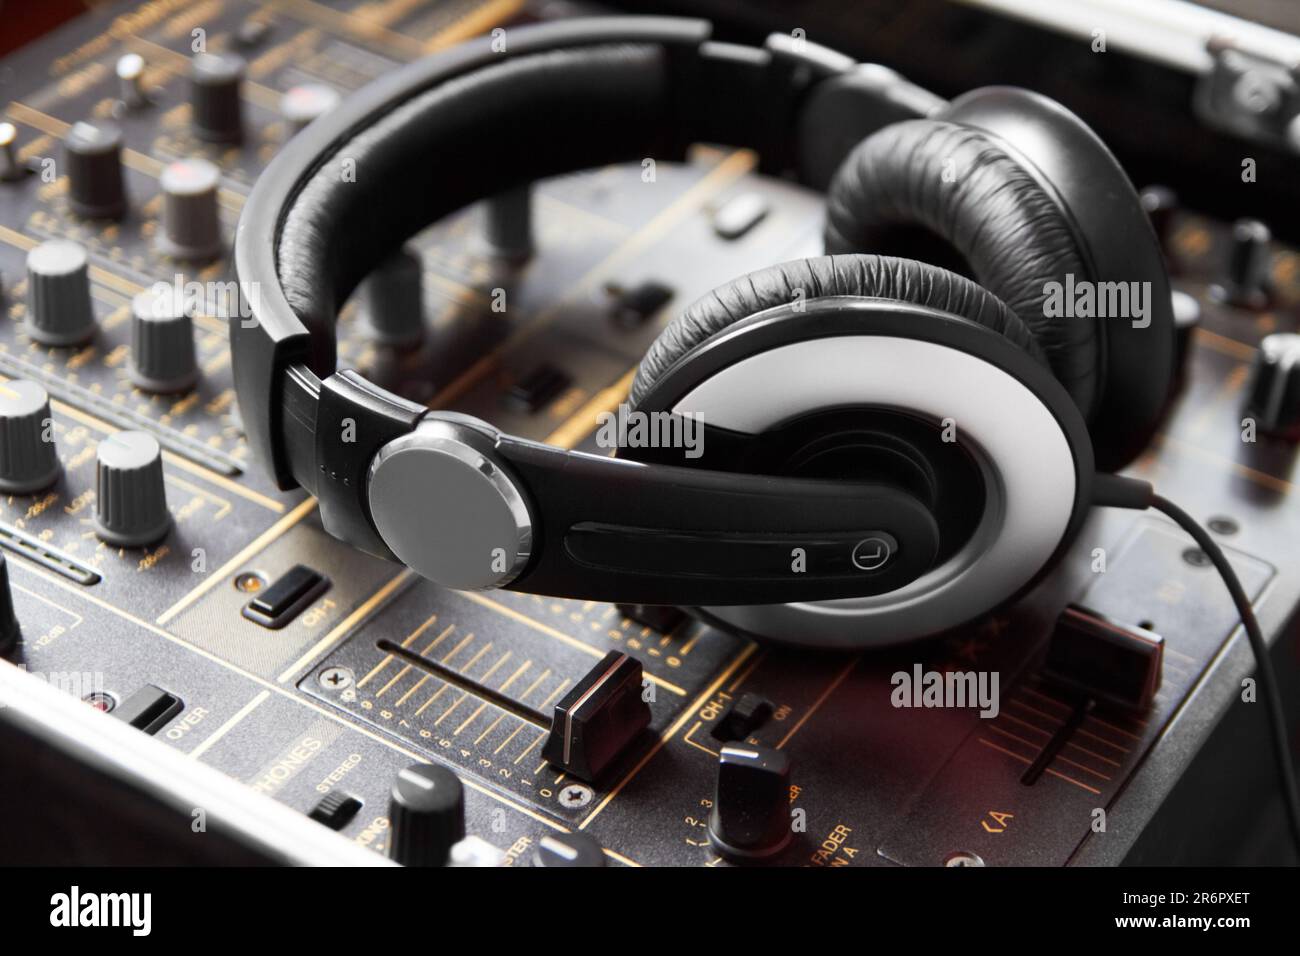 Headphones, mixer and sound engineering equipment in a recording studio for music production closeup. DJ, control and creative with audio technology Stock Photo